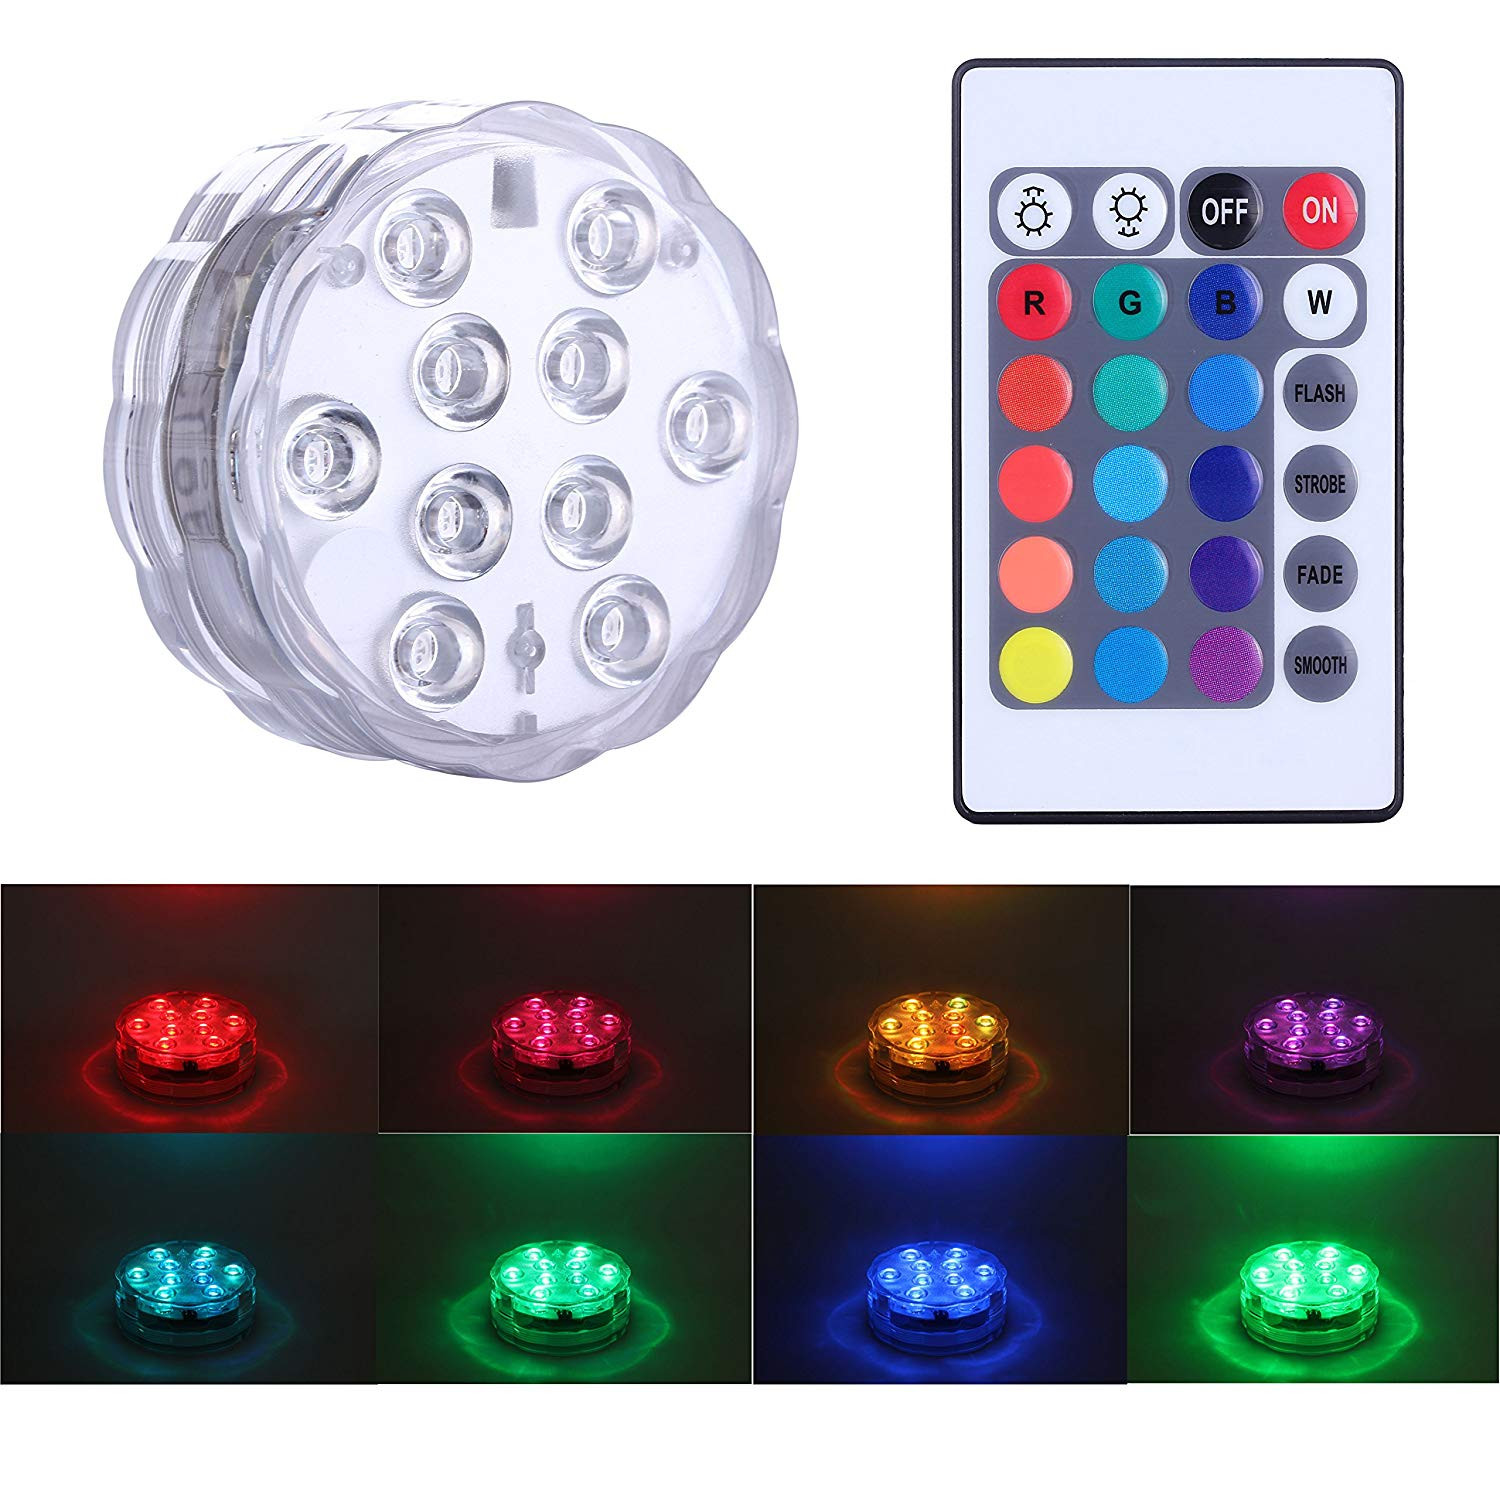 29 Great Led Base Lights for Vases 2024 free download led base lights for vases of submersible led lights with remote control alilimall multi color inside submersible led lights with remote control alilimall multi color changing waterproof batt